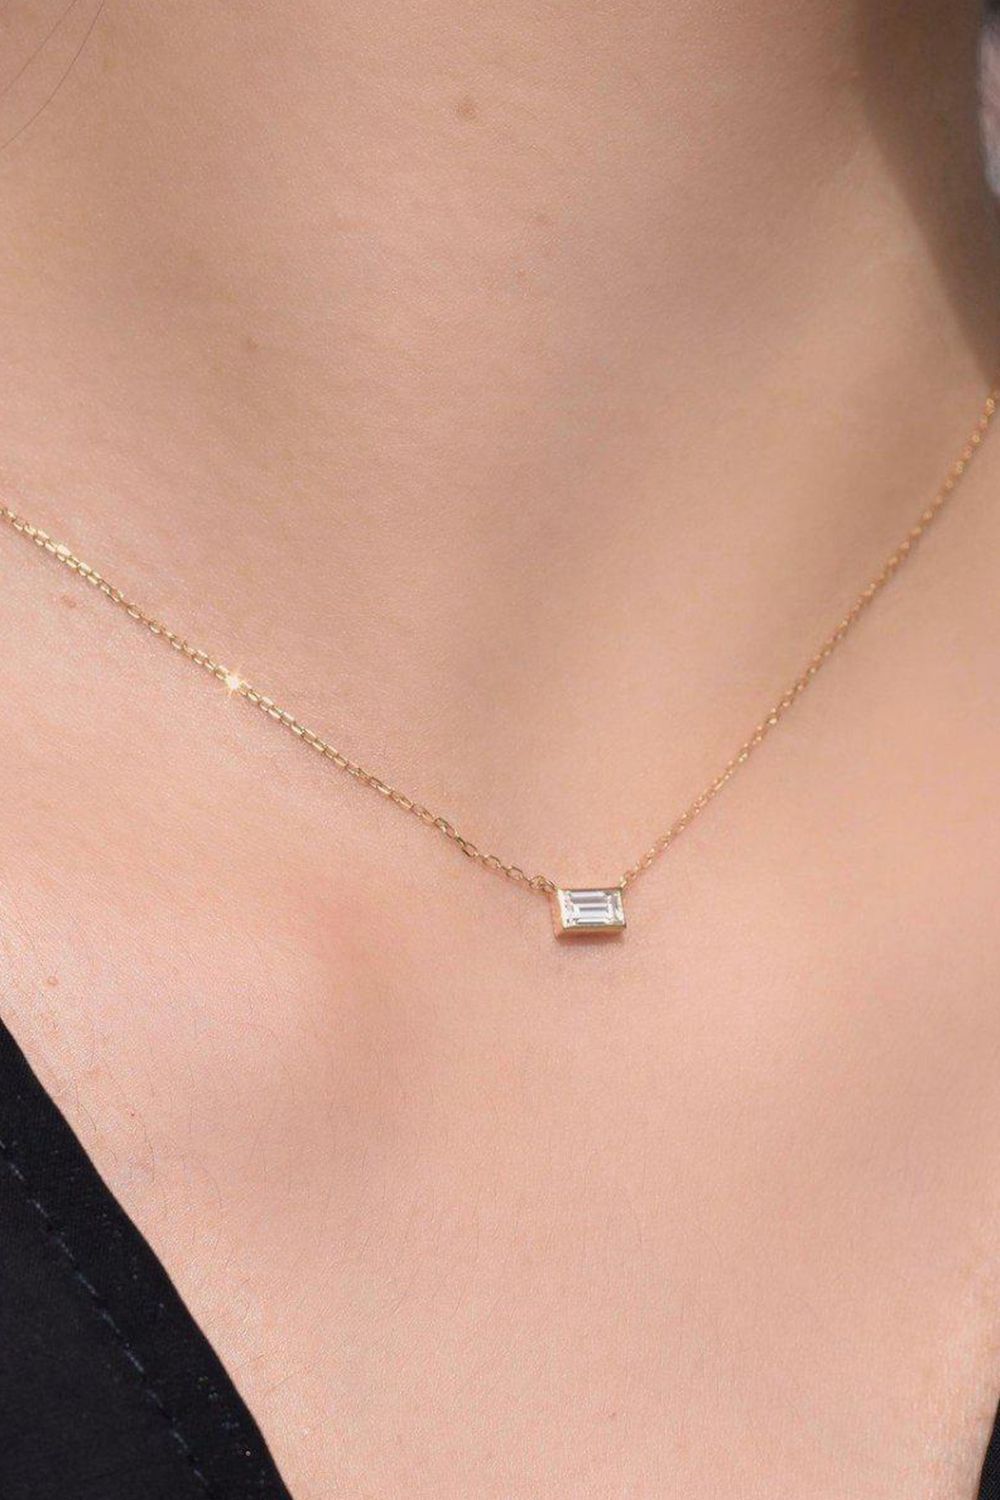 BUGUETTE CUT MOISSANITE NECKLACE / バゲット カット モアサナイト ネックレス K10/K18 (イエローゴールド)  - K10 - YELLOW-GOLD